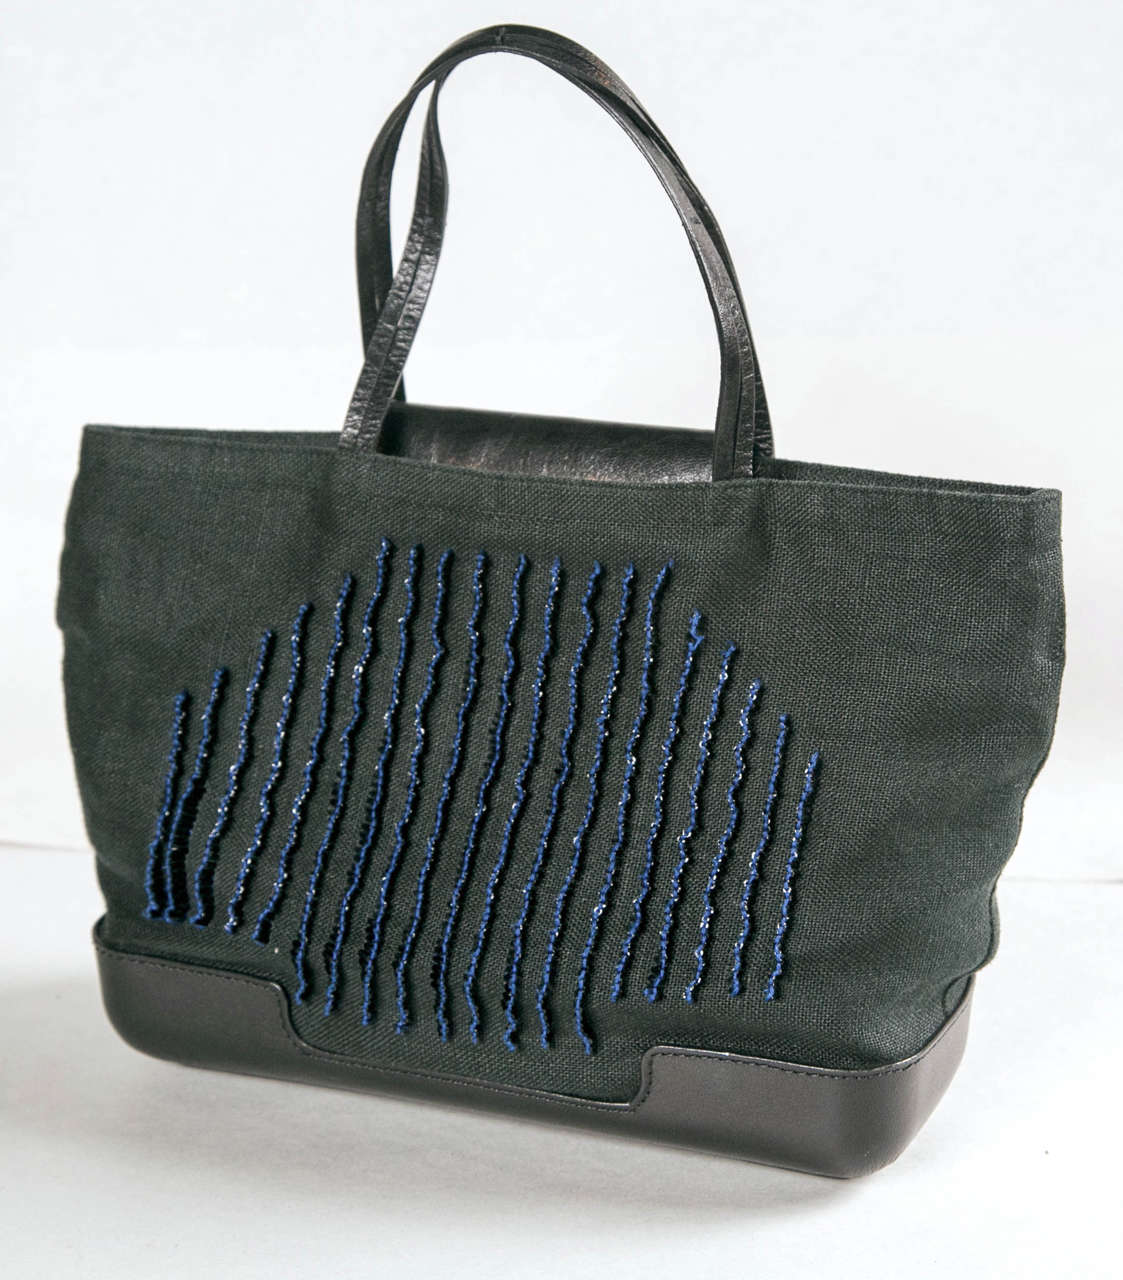 Unusual black textile Bottega Veneta purse with black leather accents. It features eye-catching blue and black bead work.